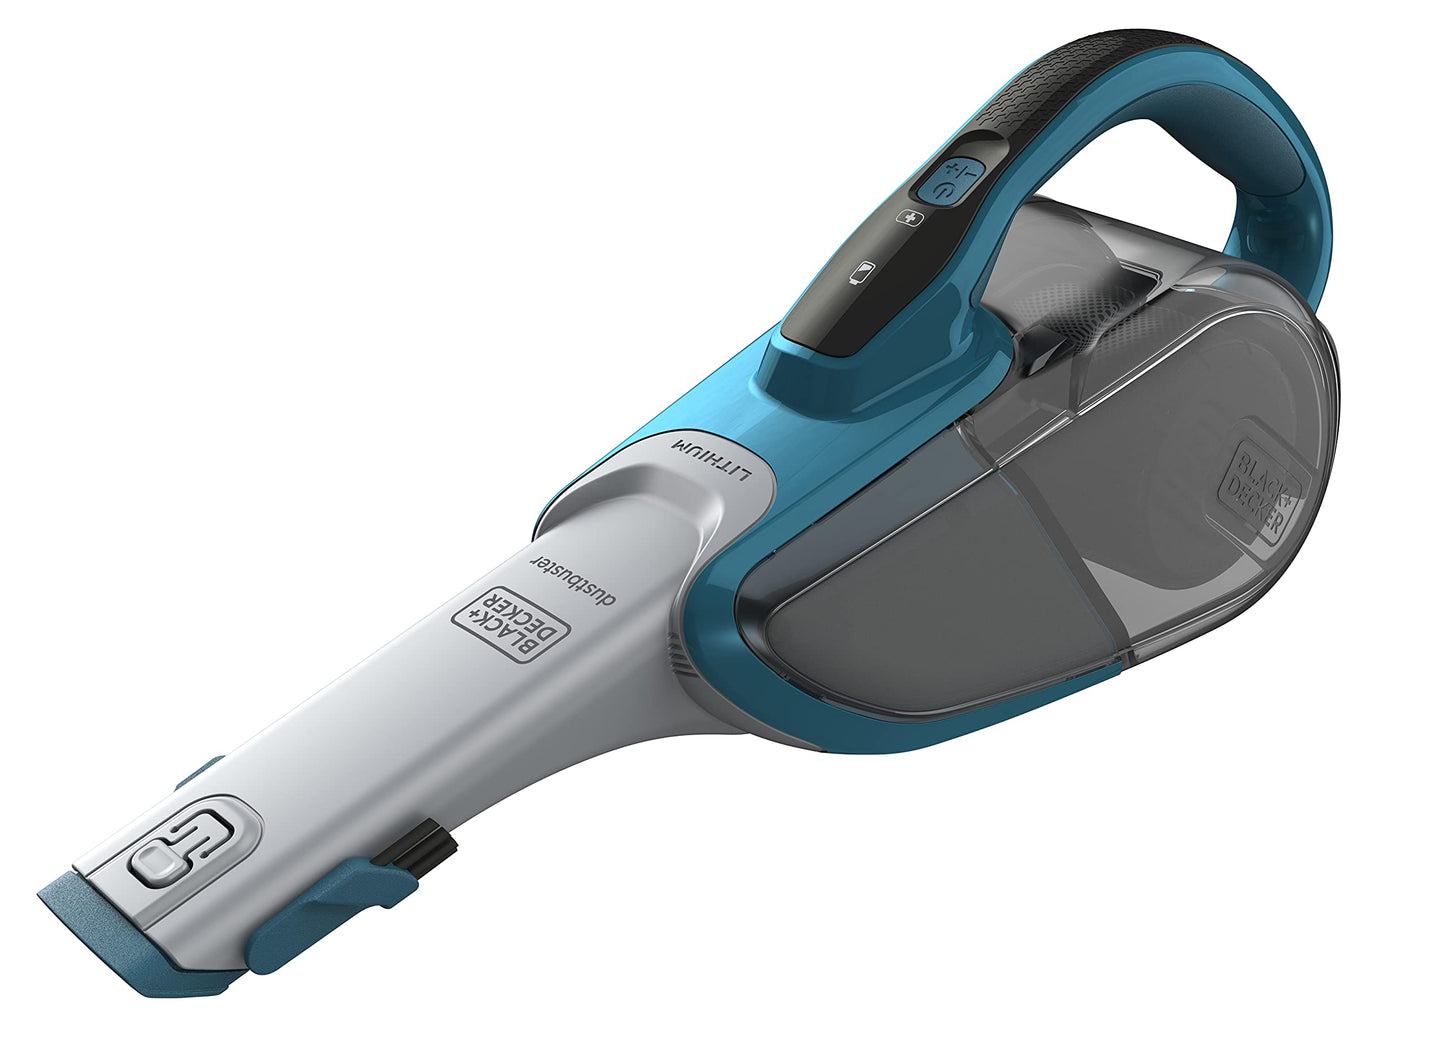 BLACK+DECKER 10.8V 21.6Wh Cordless Handheld Vacuum Cleaner With Lithium-Ion Battery, 25AW Suction Power, 500ml Bowl Capacity And Triple Filteration, For Quick+Easy Cleaning DVJ320J-B5 2 Years Warranty